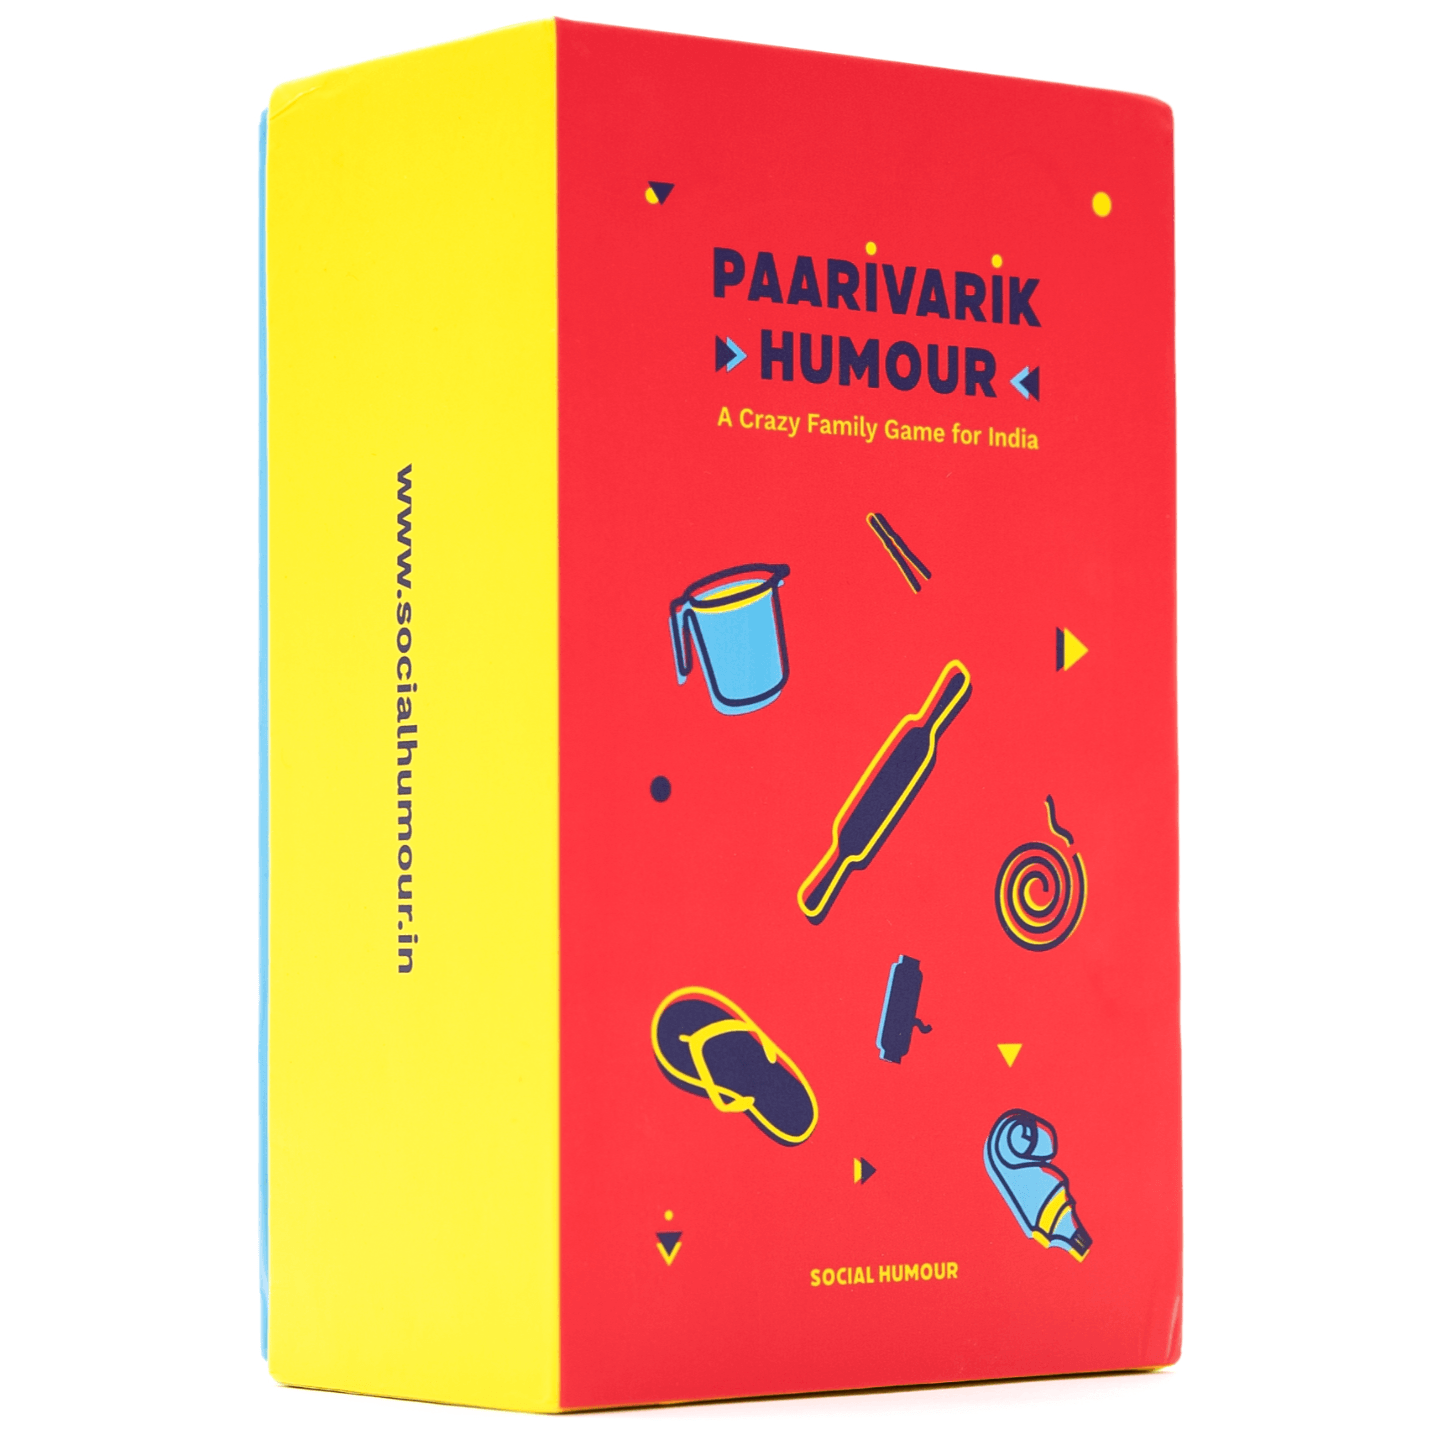 Paarivarik Humour  Parivarik Humour  A Crazy Family Charades Mashup Card Game - The Ultimate Family Party Game - Board Games for Family Night with Adults and Kids